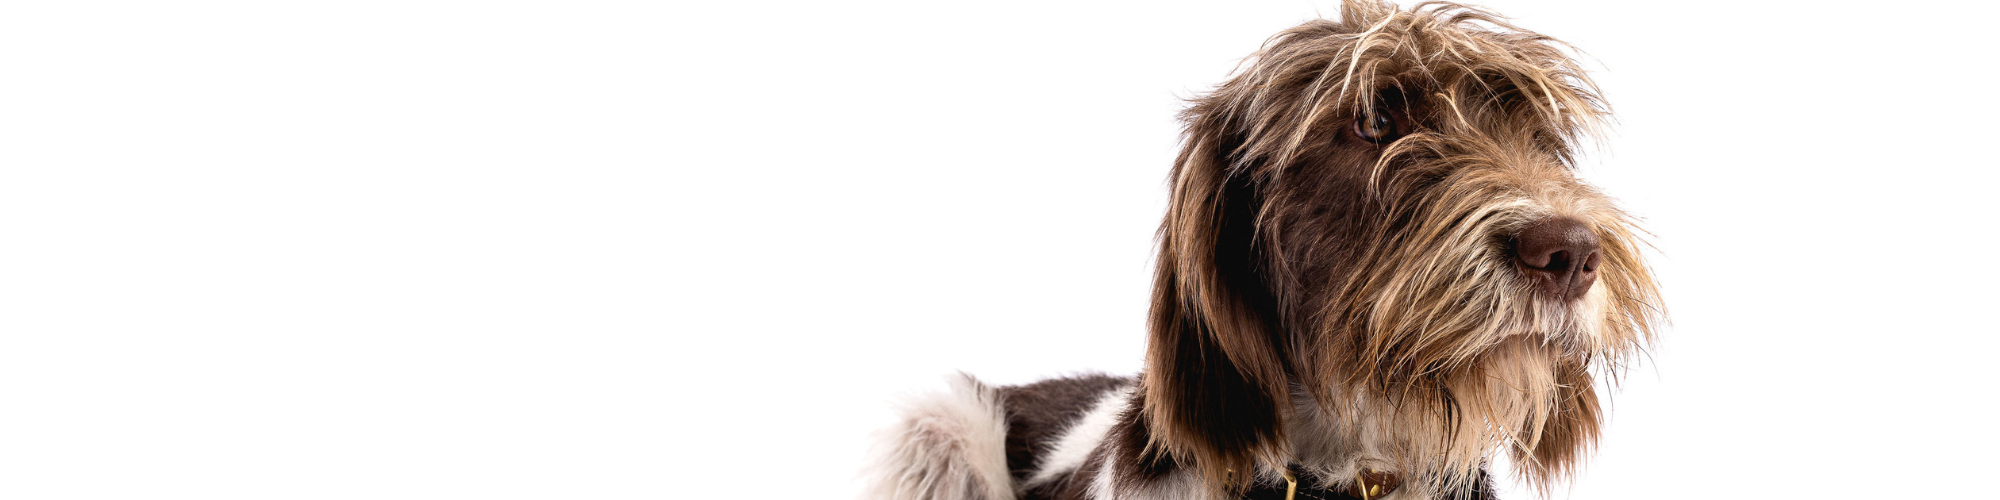 Dog Grooming - How the Change of Season Affects Your Dog - Decs Pets